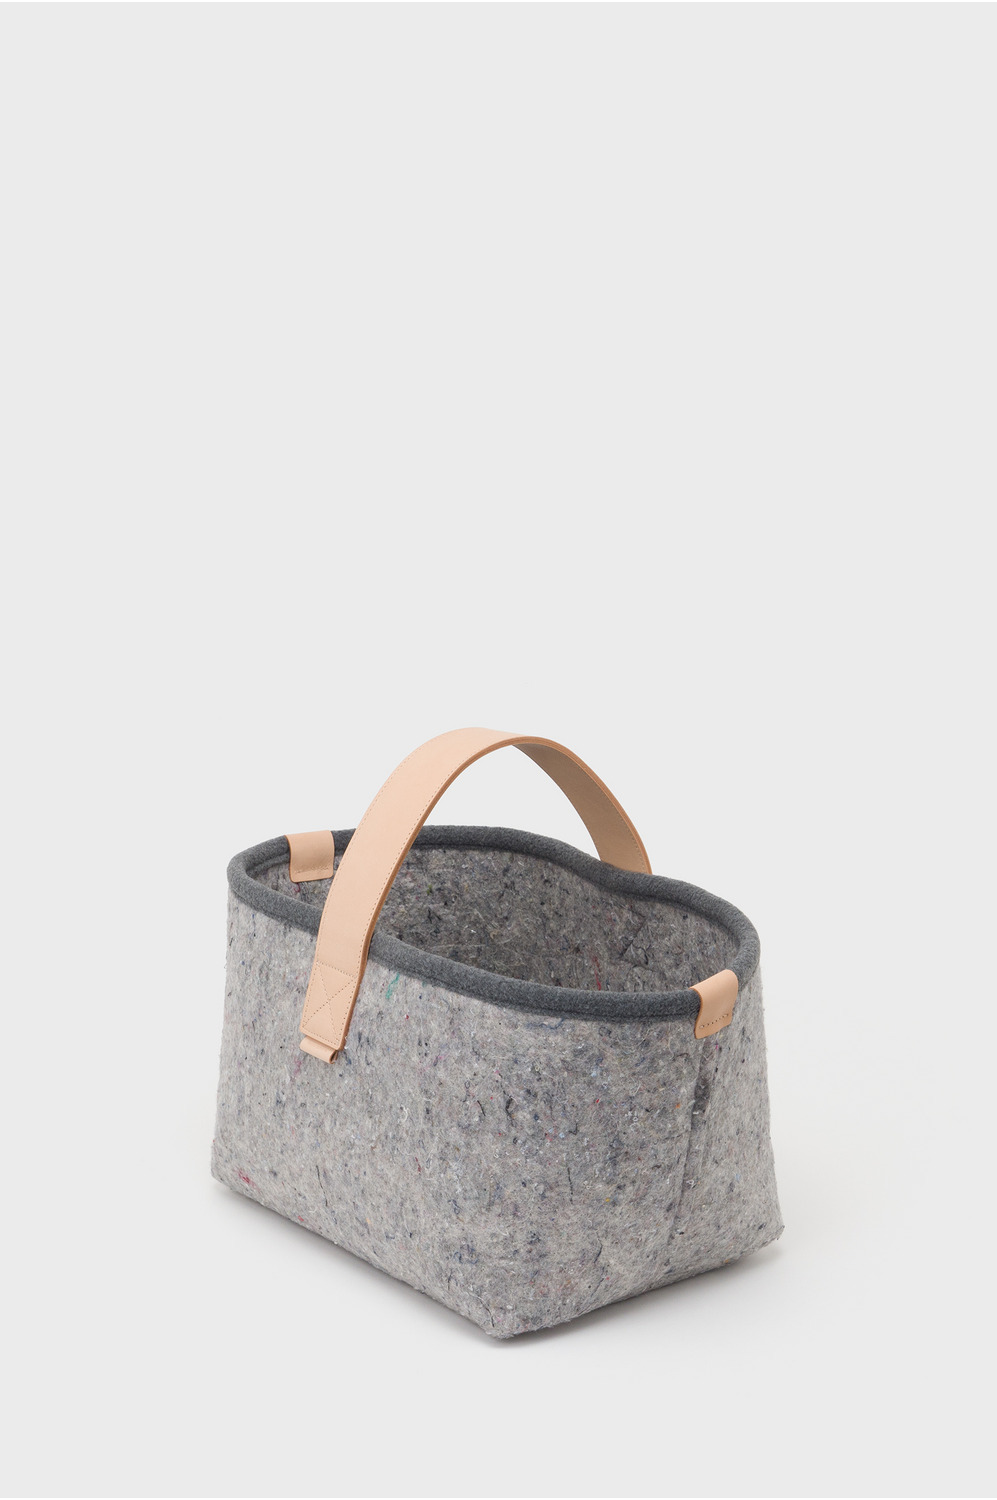 Recycled felt) one strap bag large 詳細画像 mix gray/natural 2